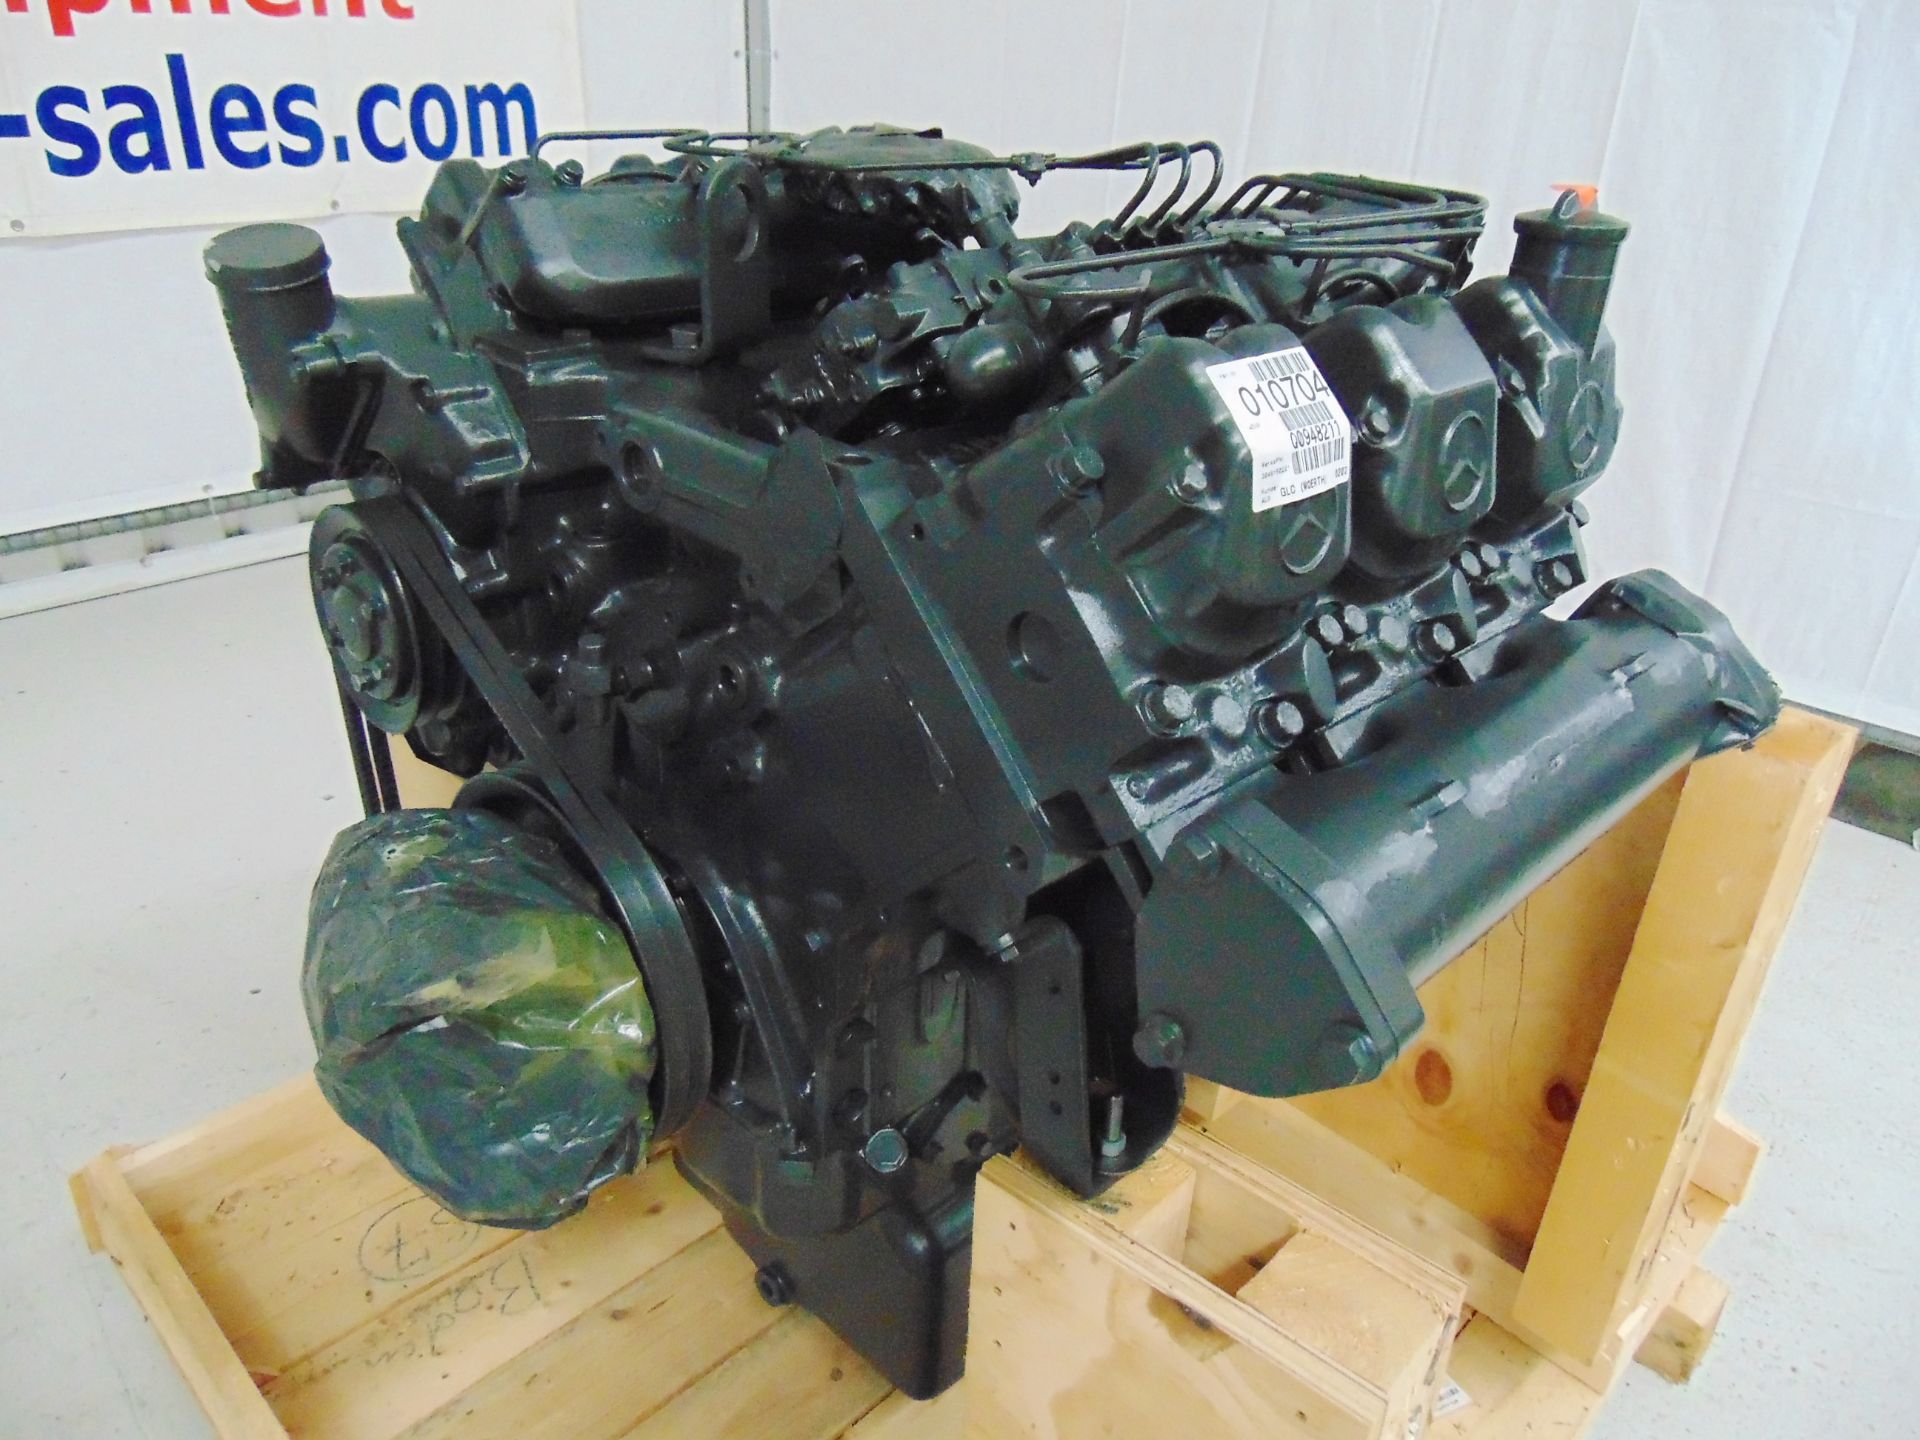 Factory Reconditioned Mercedes-Benz OM441 V6 Turbo Diesel Engine - Image 12 of 14